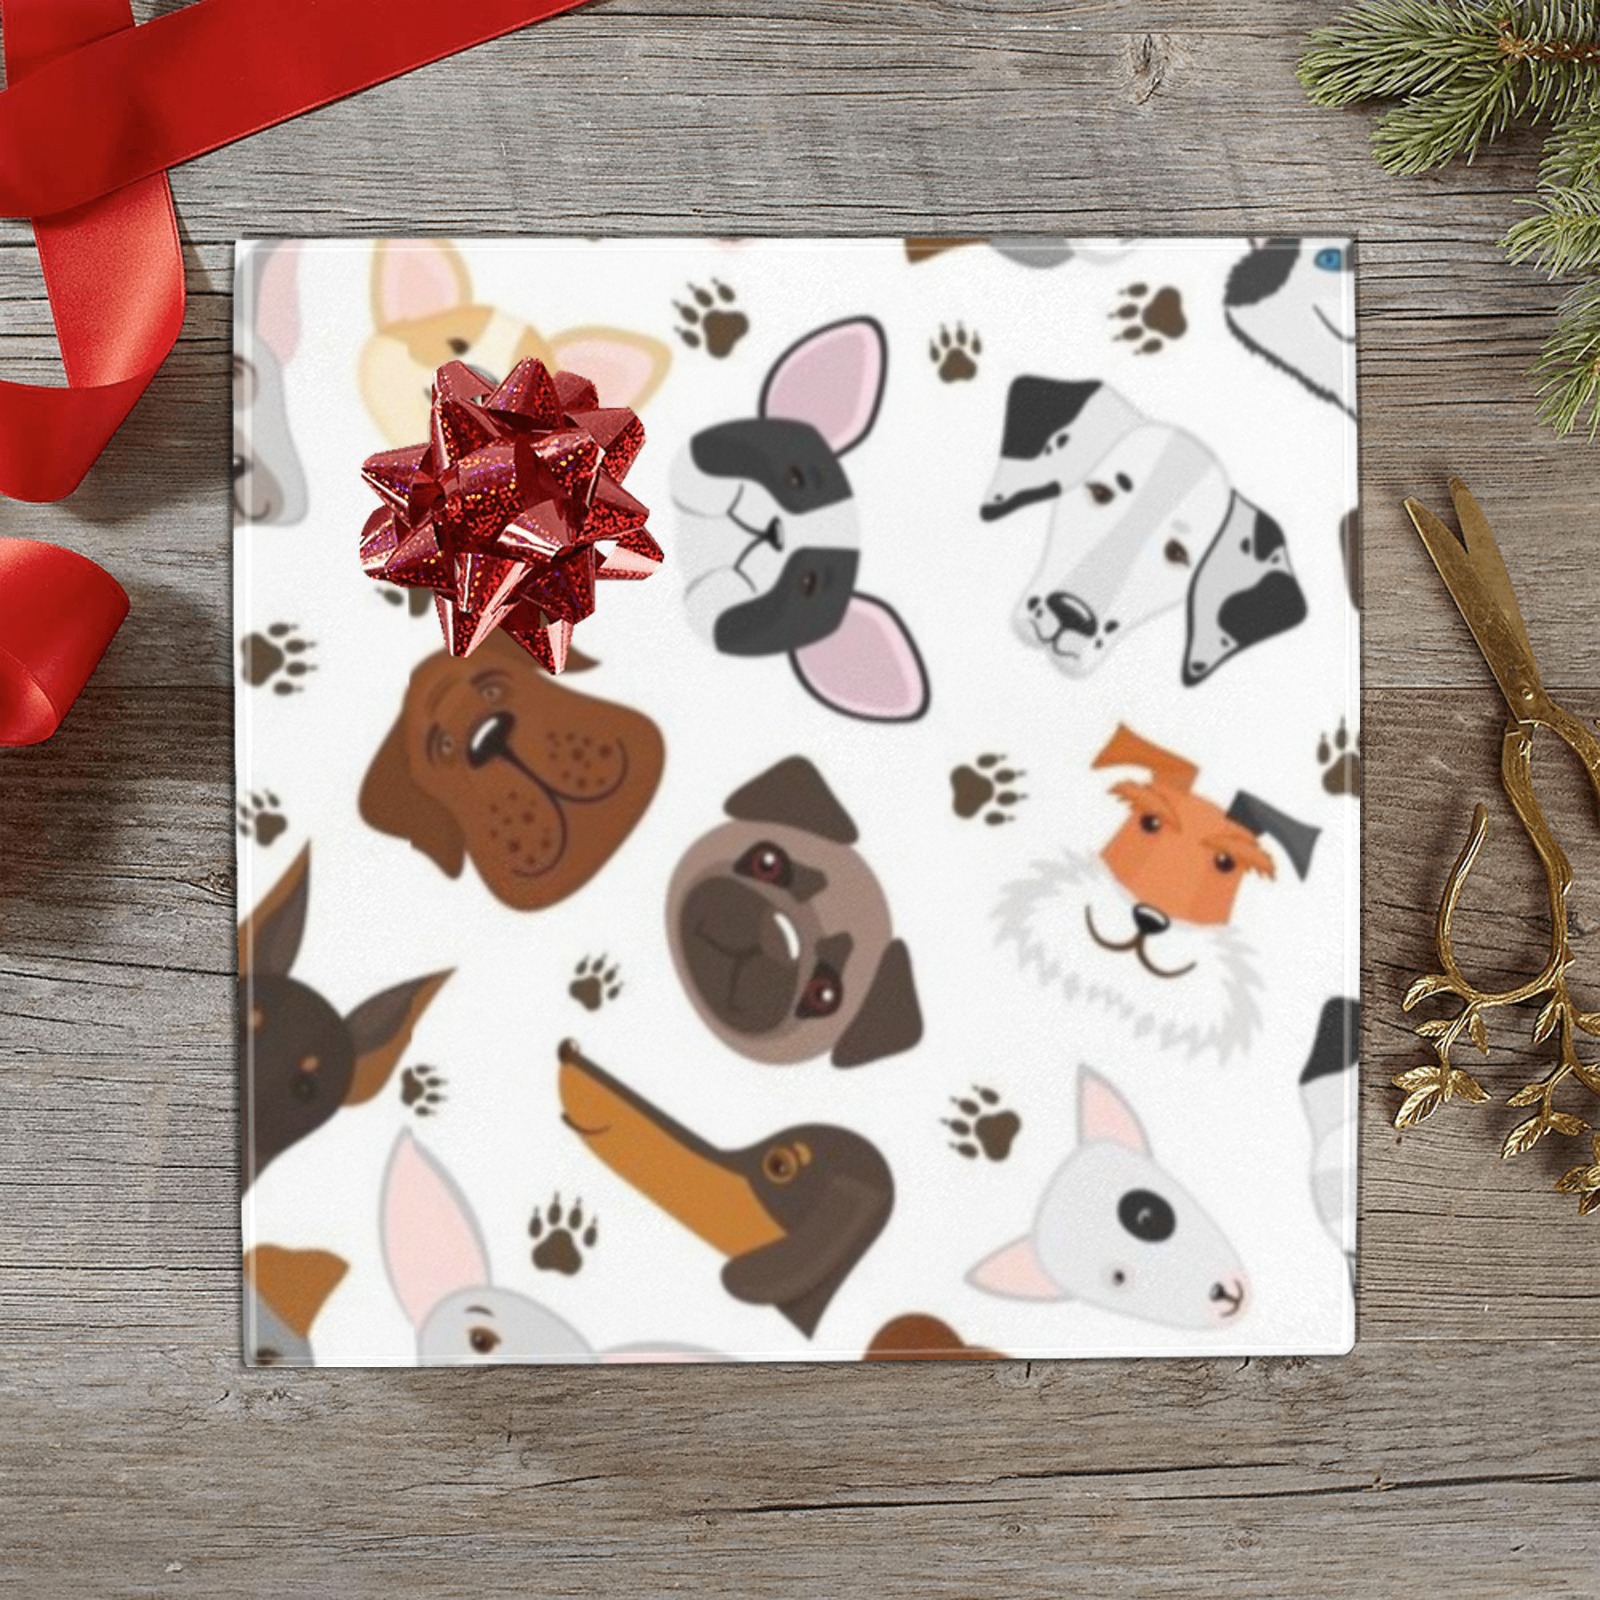 Cute Puppy Mixed Breed Pattern Gift Wrapping Paper 58"x 23" (1 Roll)